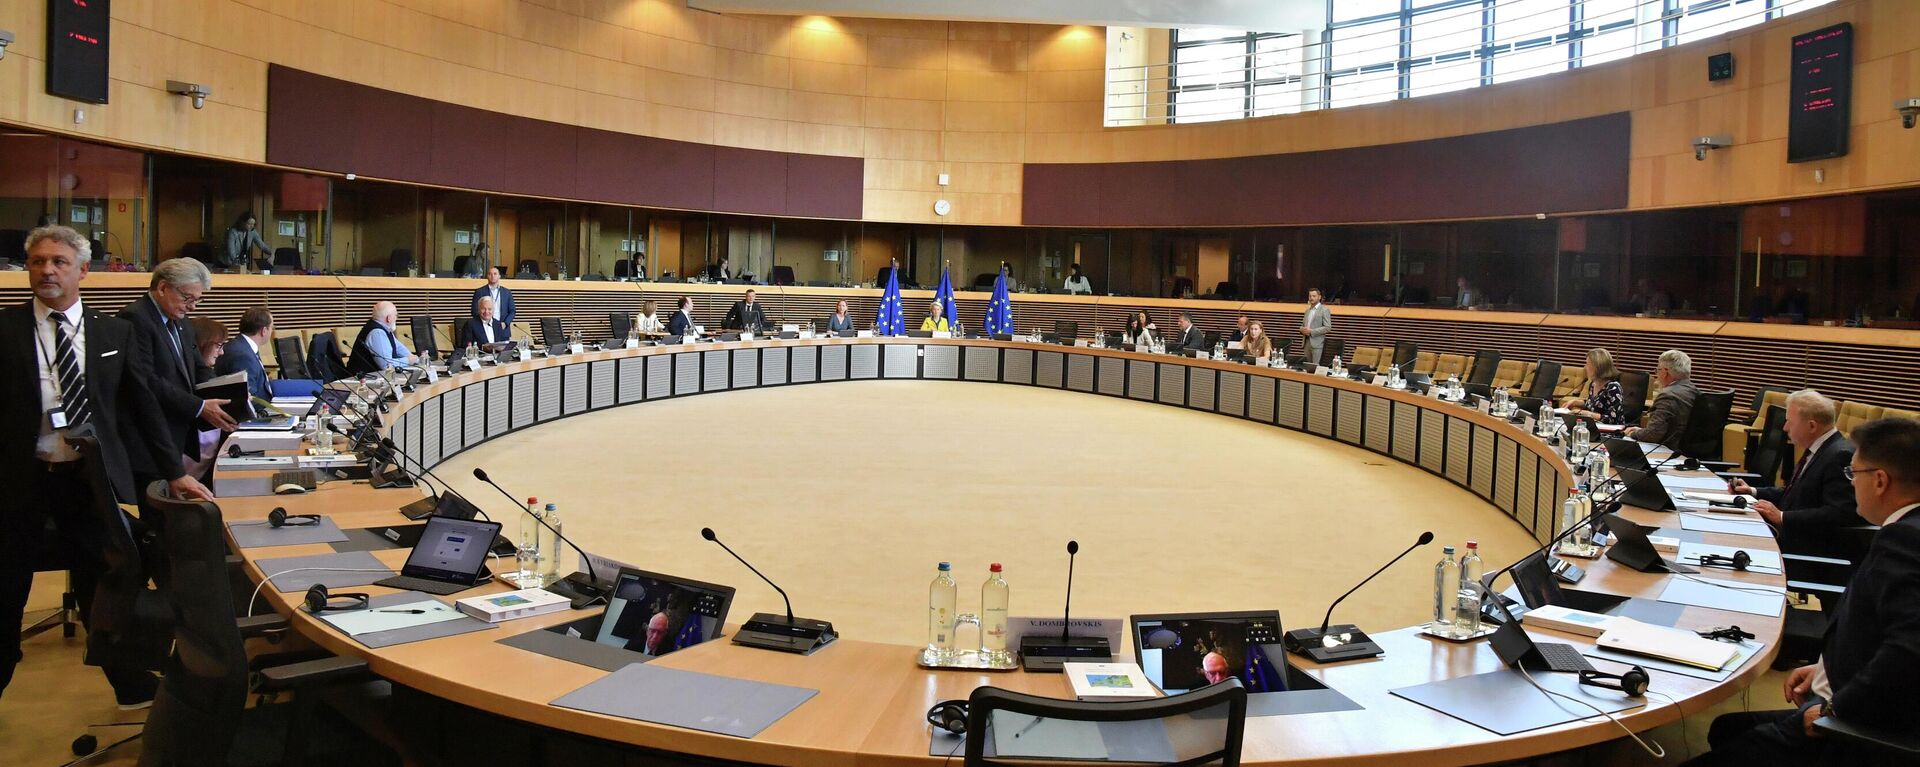 European Commission President Ursula von der Leyen, center, chairs a meeting of the College of Commissioners at EU headquarters in Brussels, Friday, June 17, 2022 - Sputnik International, 1920, 17.06.2022